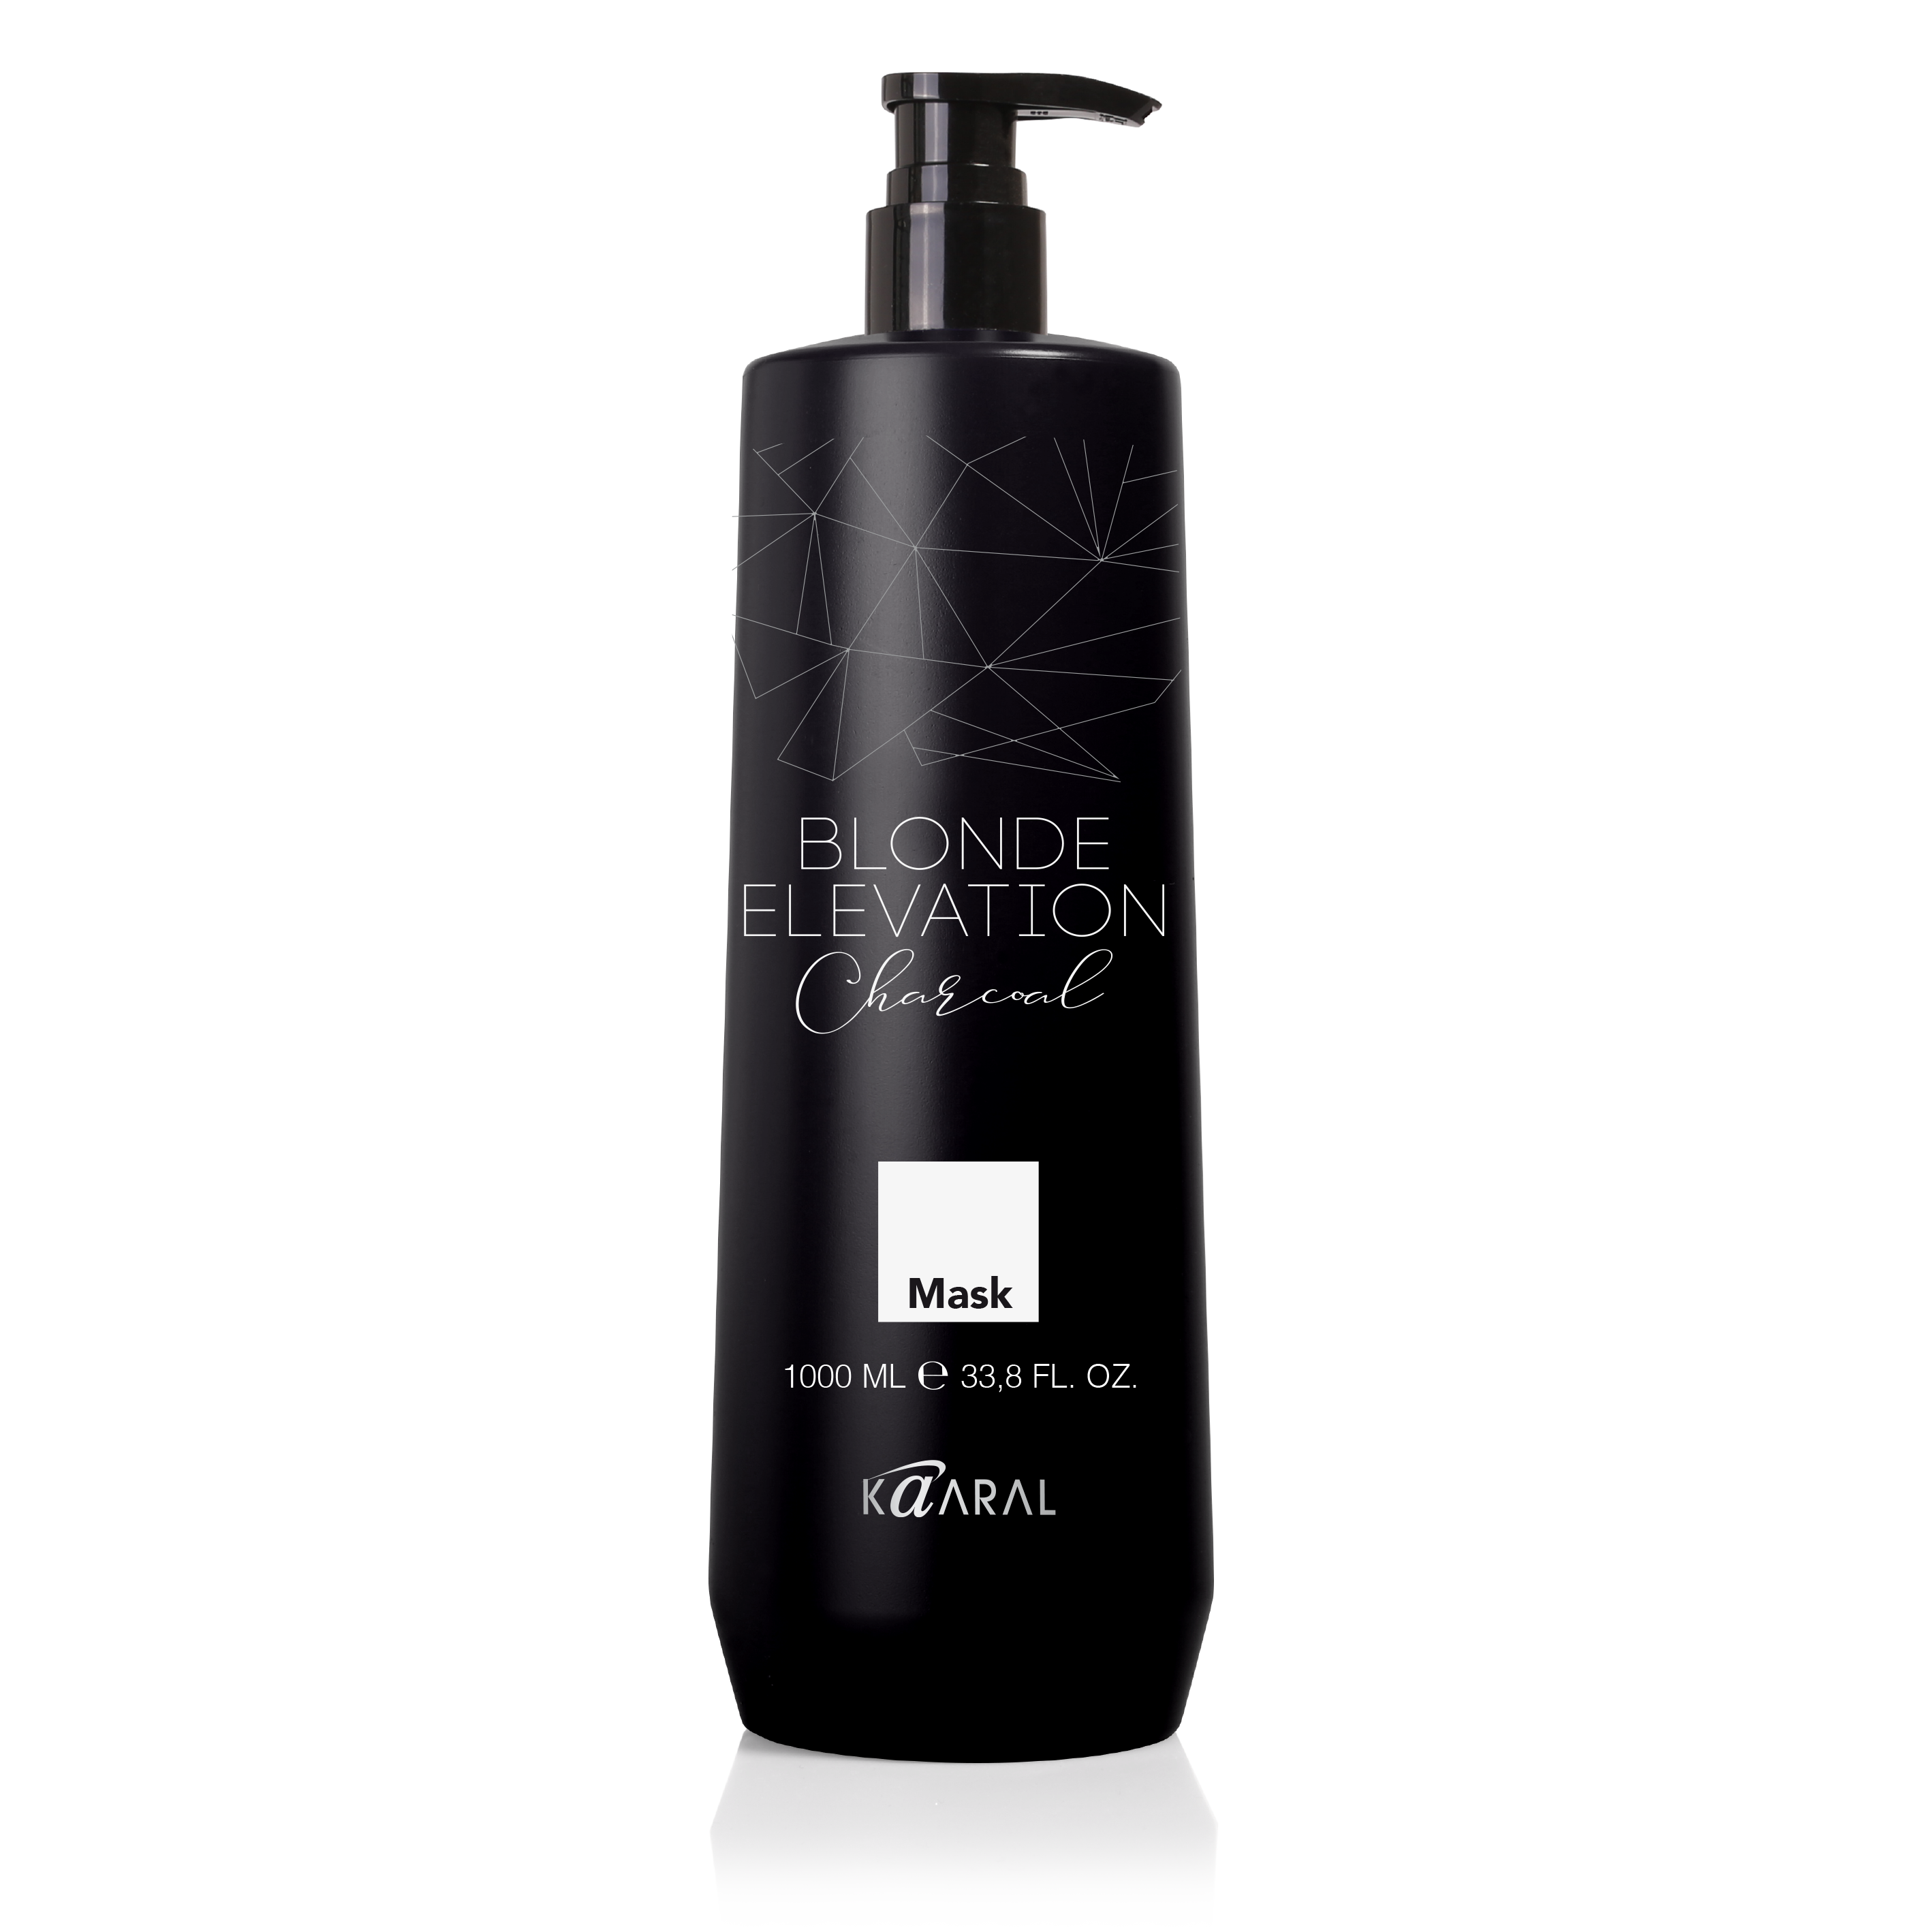 Kaaral - Blonde Elevation Charcoal Mask - Creata Beauty - Professional Beauty Products